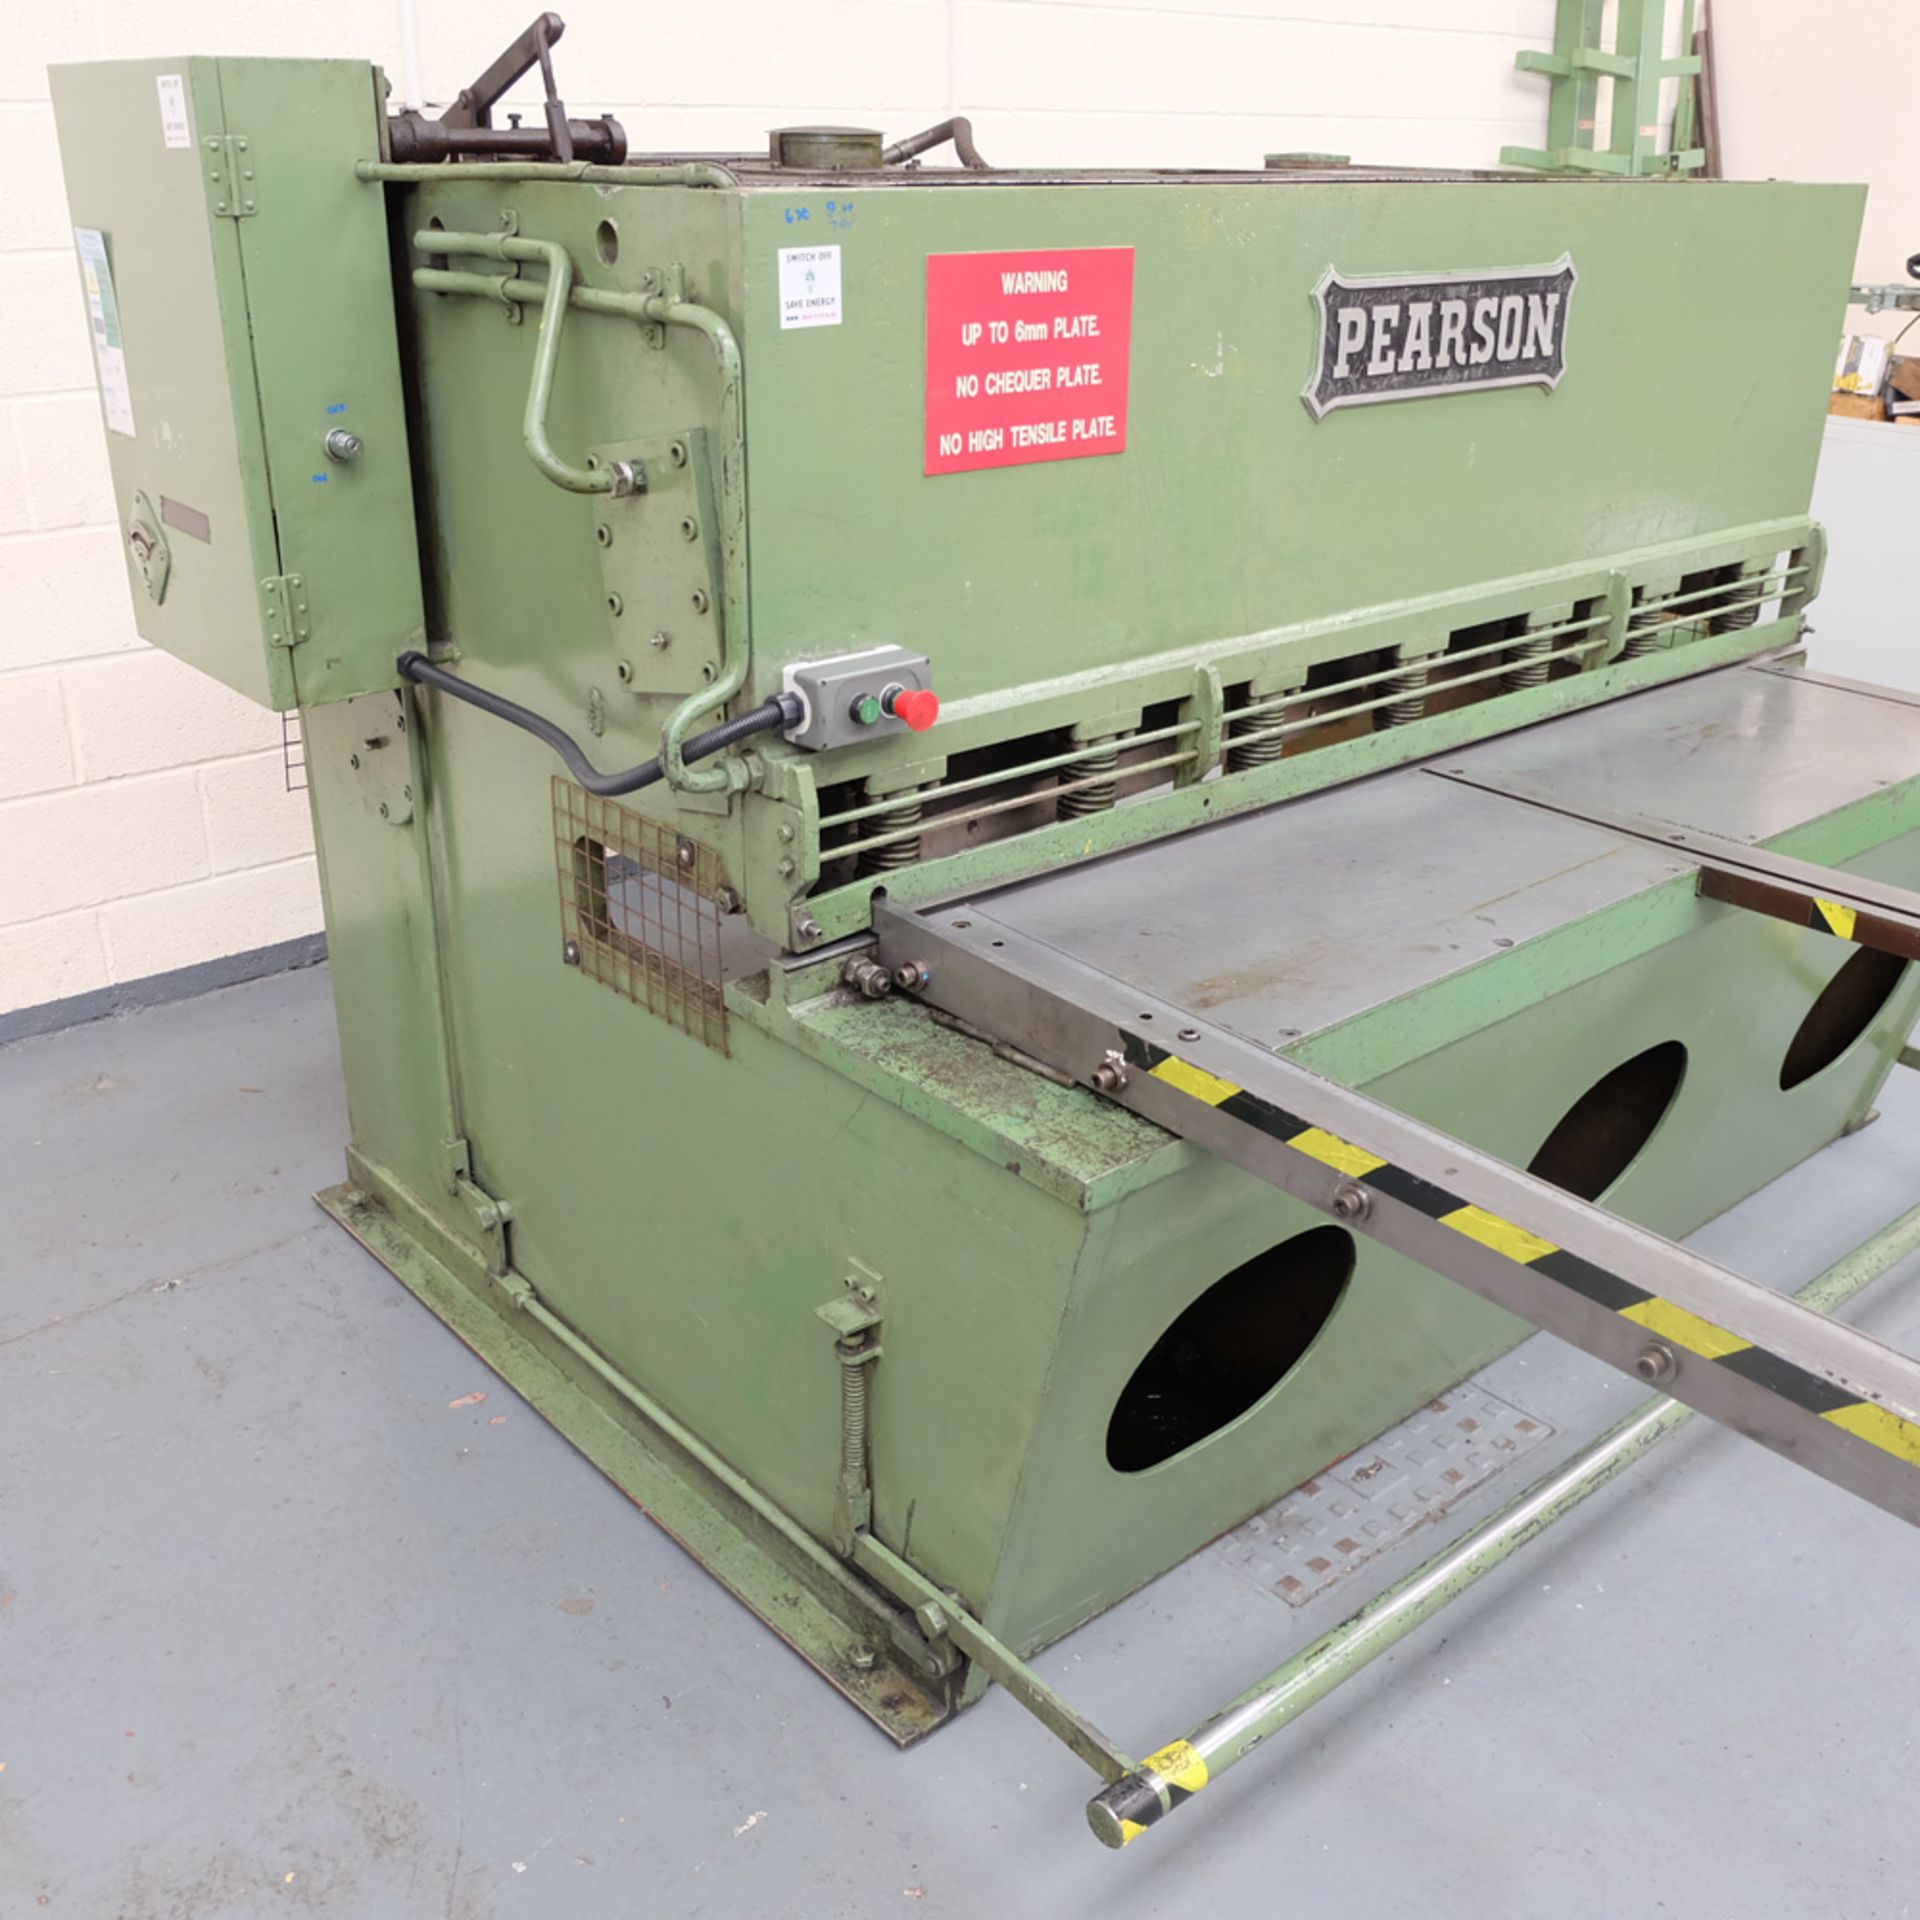 Edward Pearson Hydraulic Power Guillotine. Capacity 6' x 1/4". - Image 3 of 10